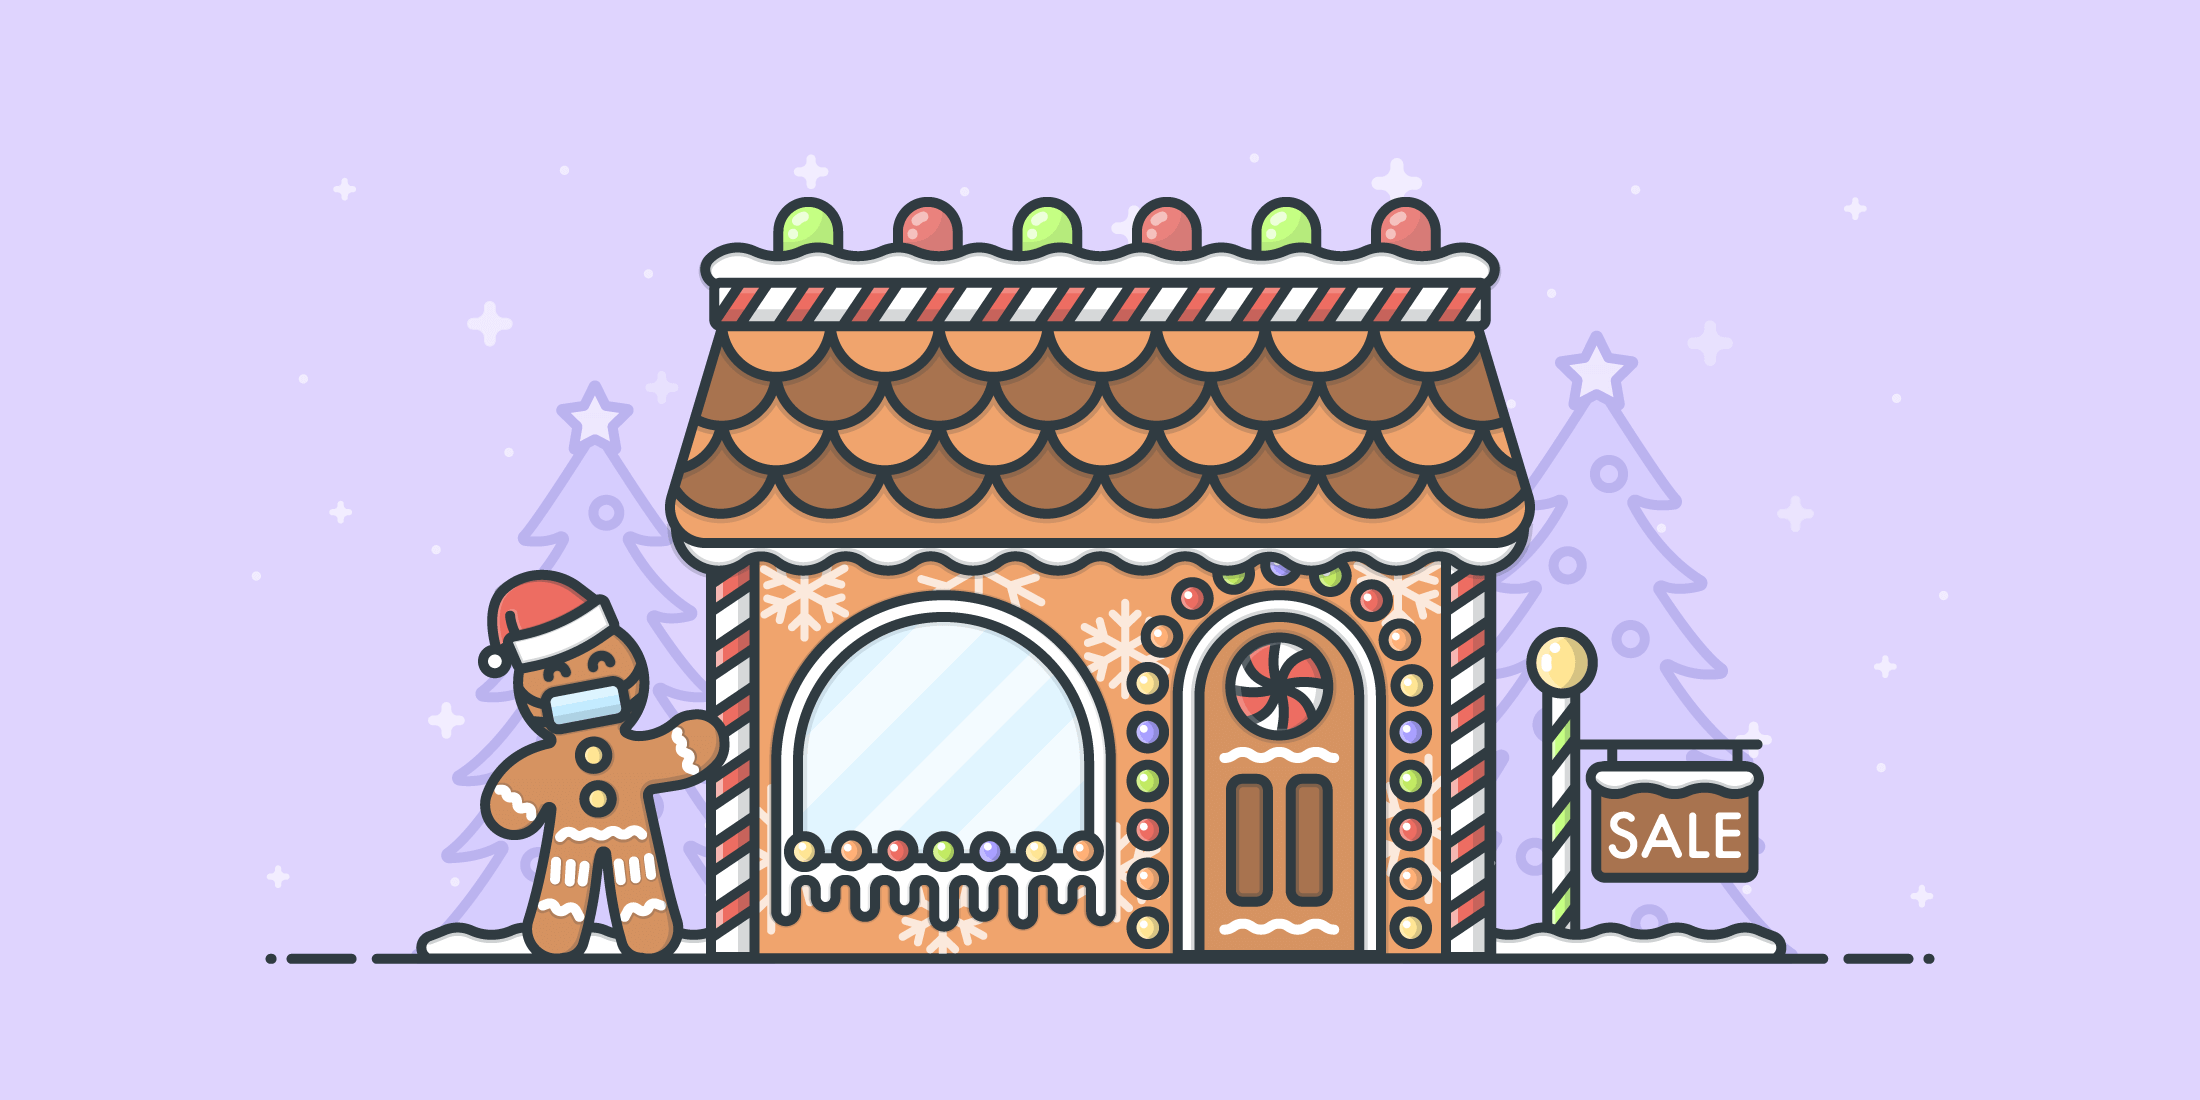 Illustration: A Gingerbread shop with gingerbread man